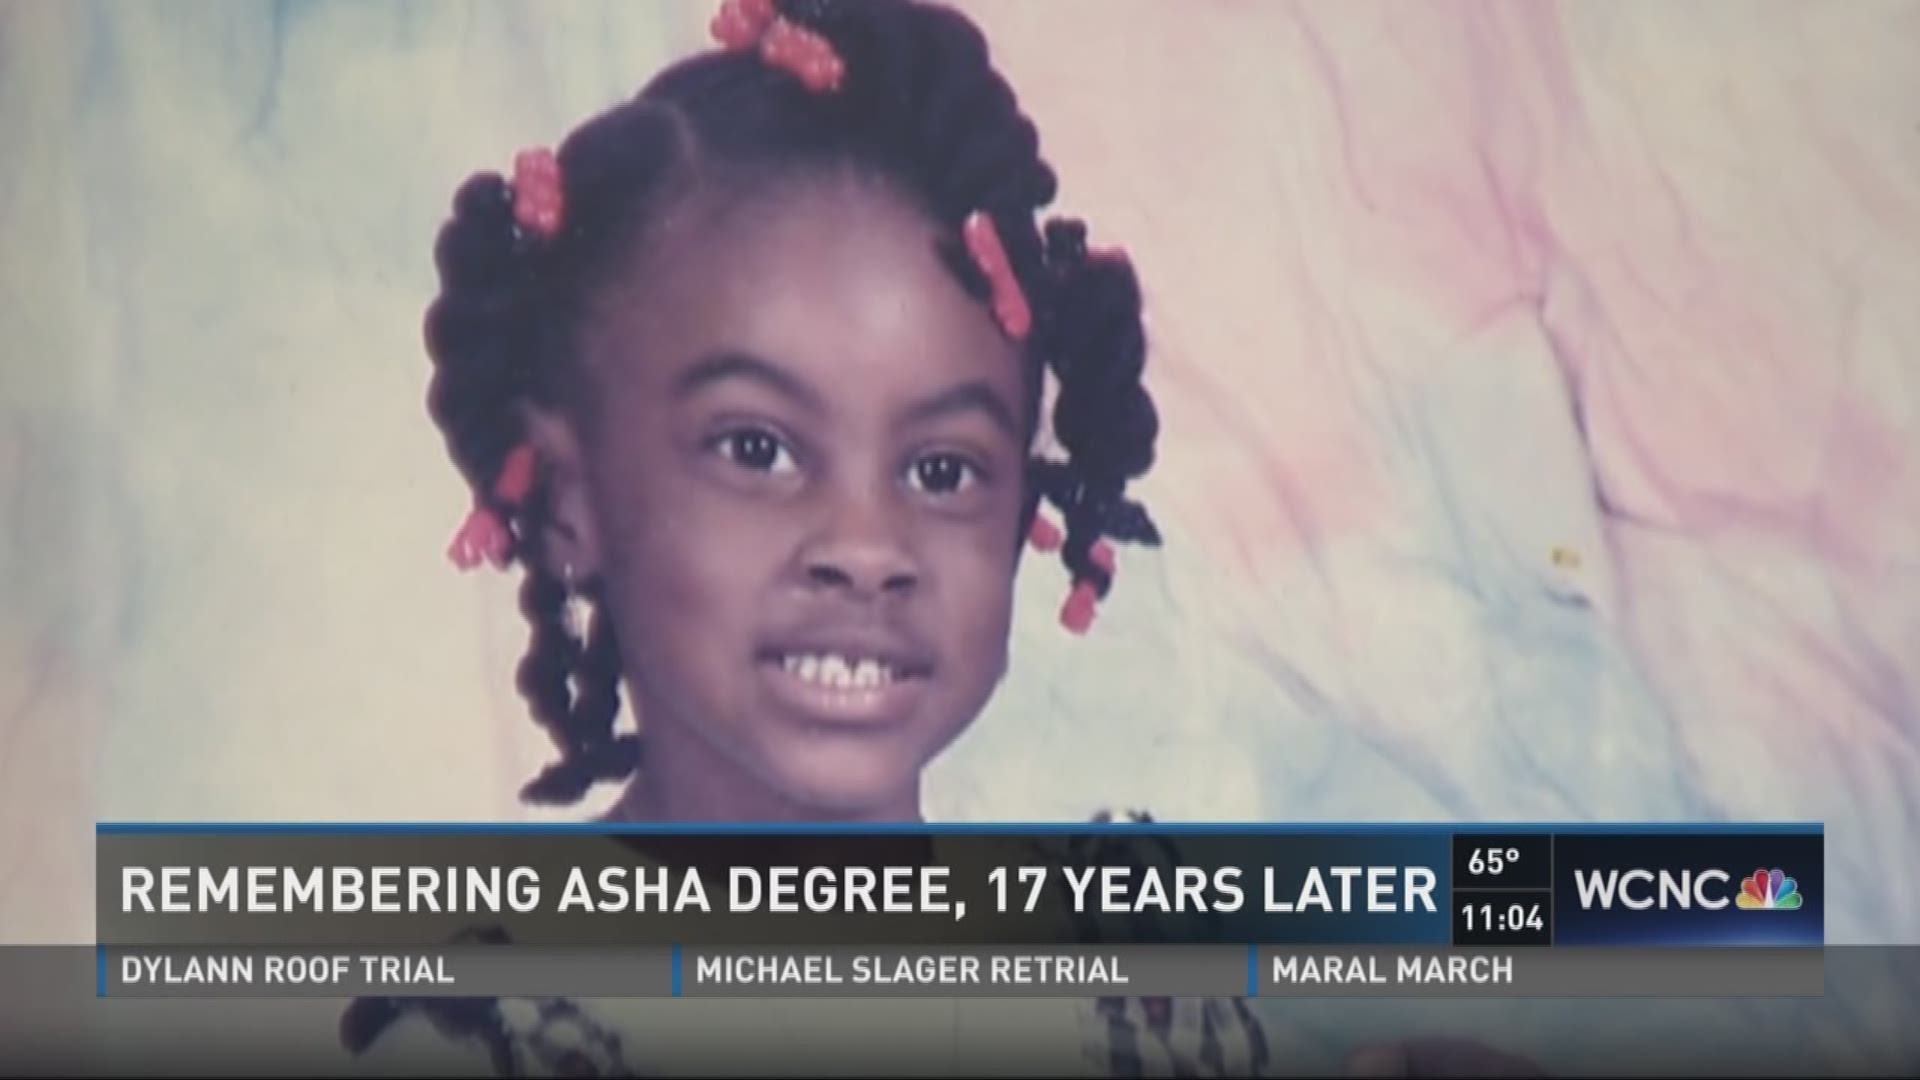 It has been nearly 17 years since Asha Degree left her Cleveland County home. Since then, she yet to be located.